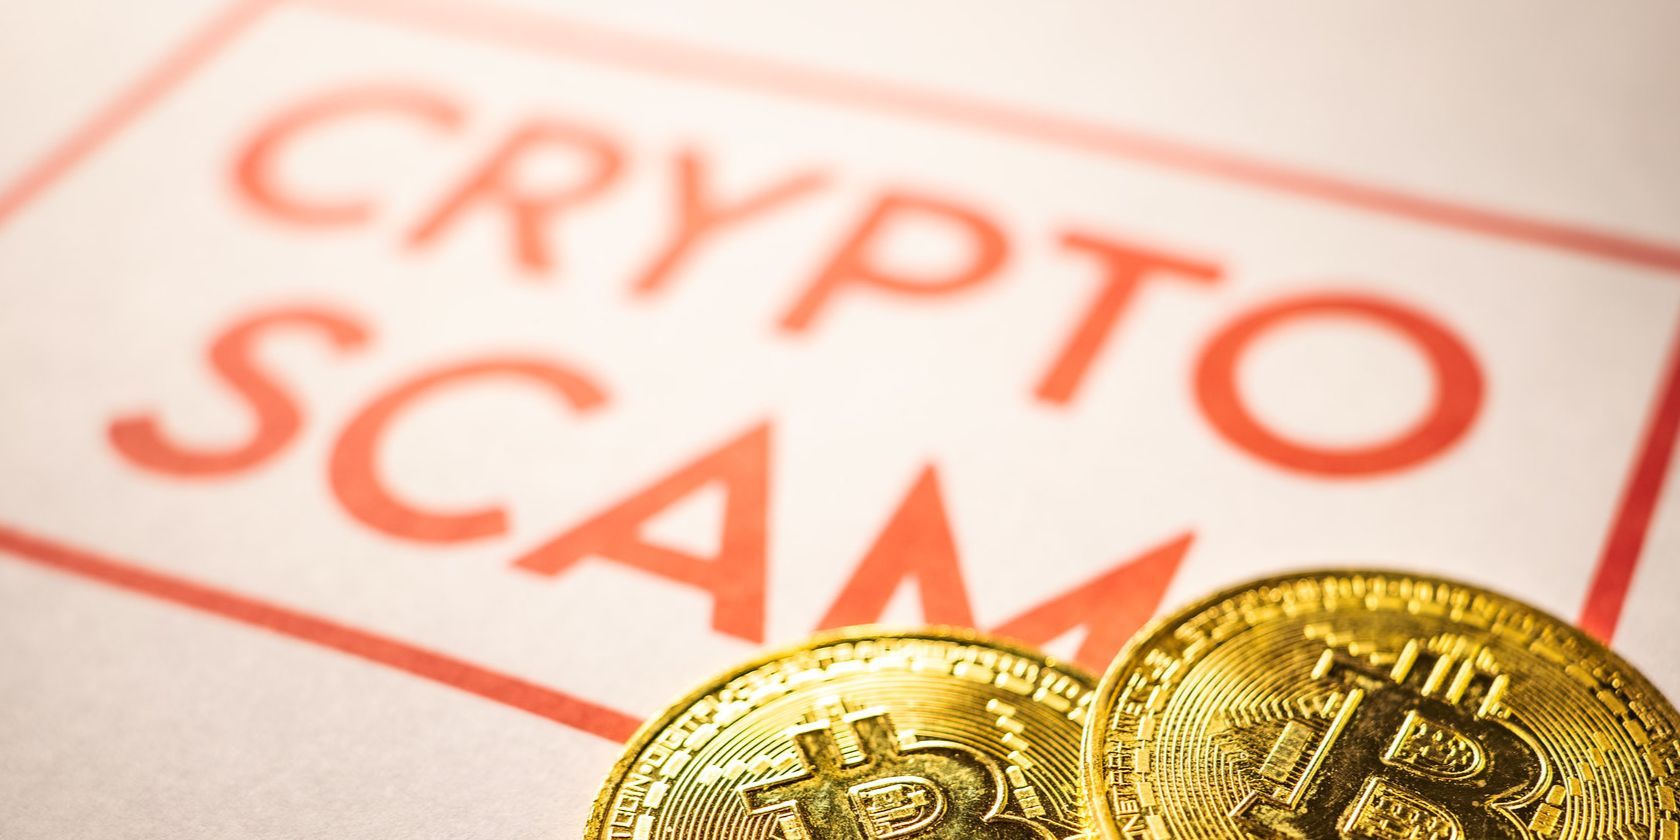 gold bitcoins next to crypto scam sign on paper